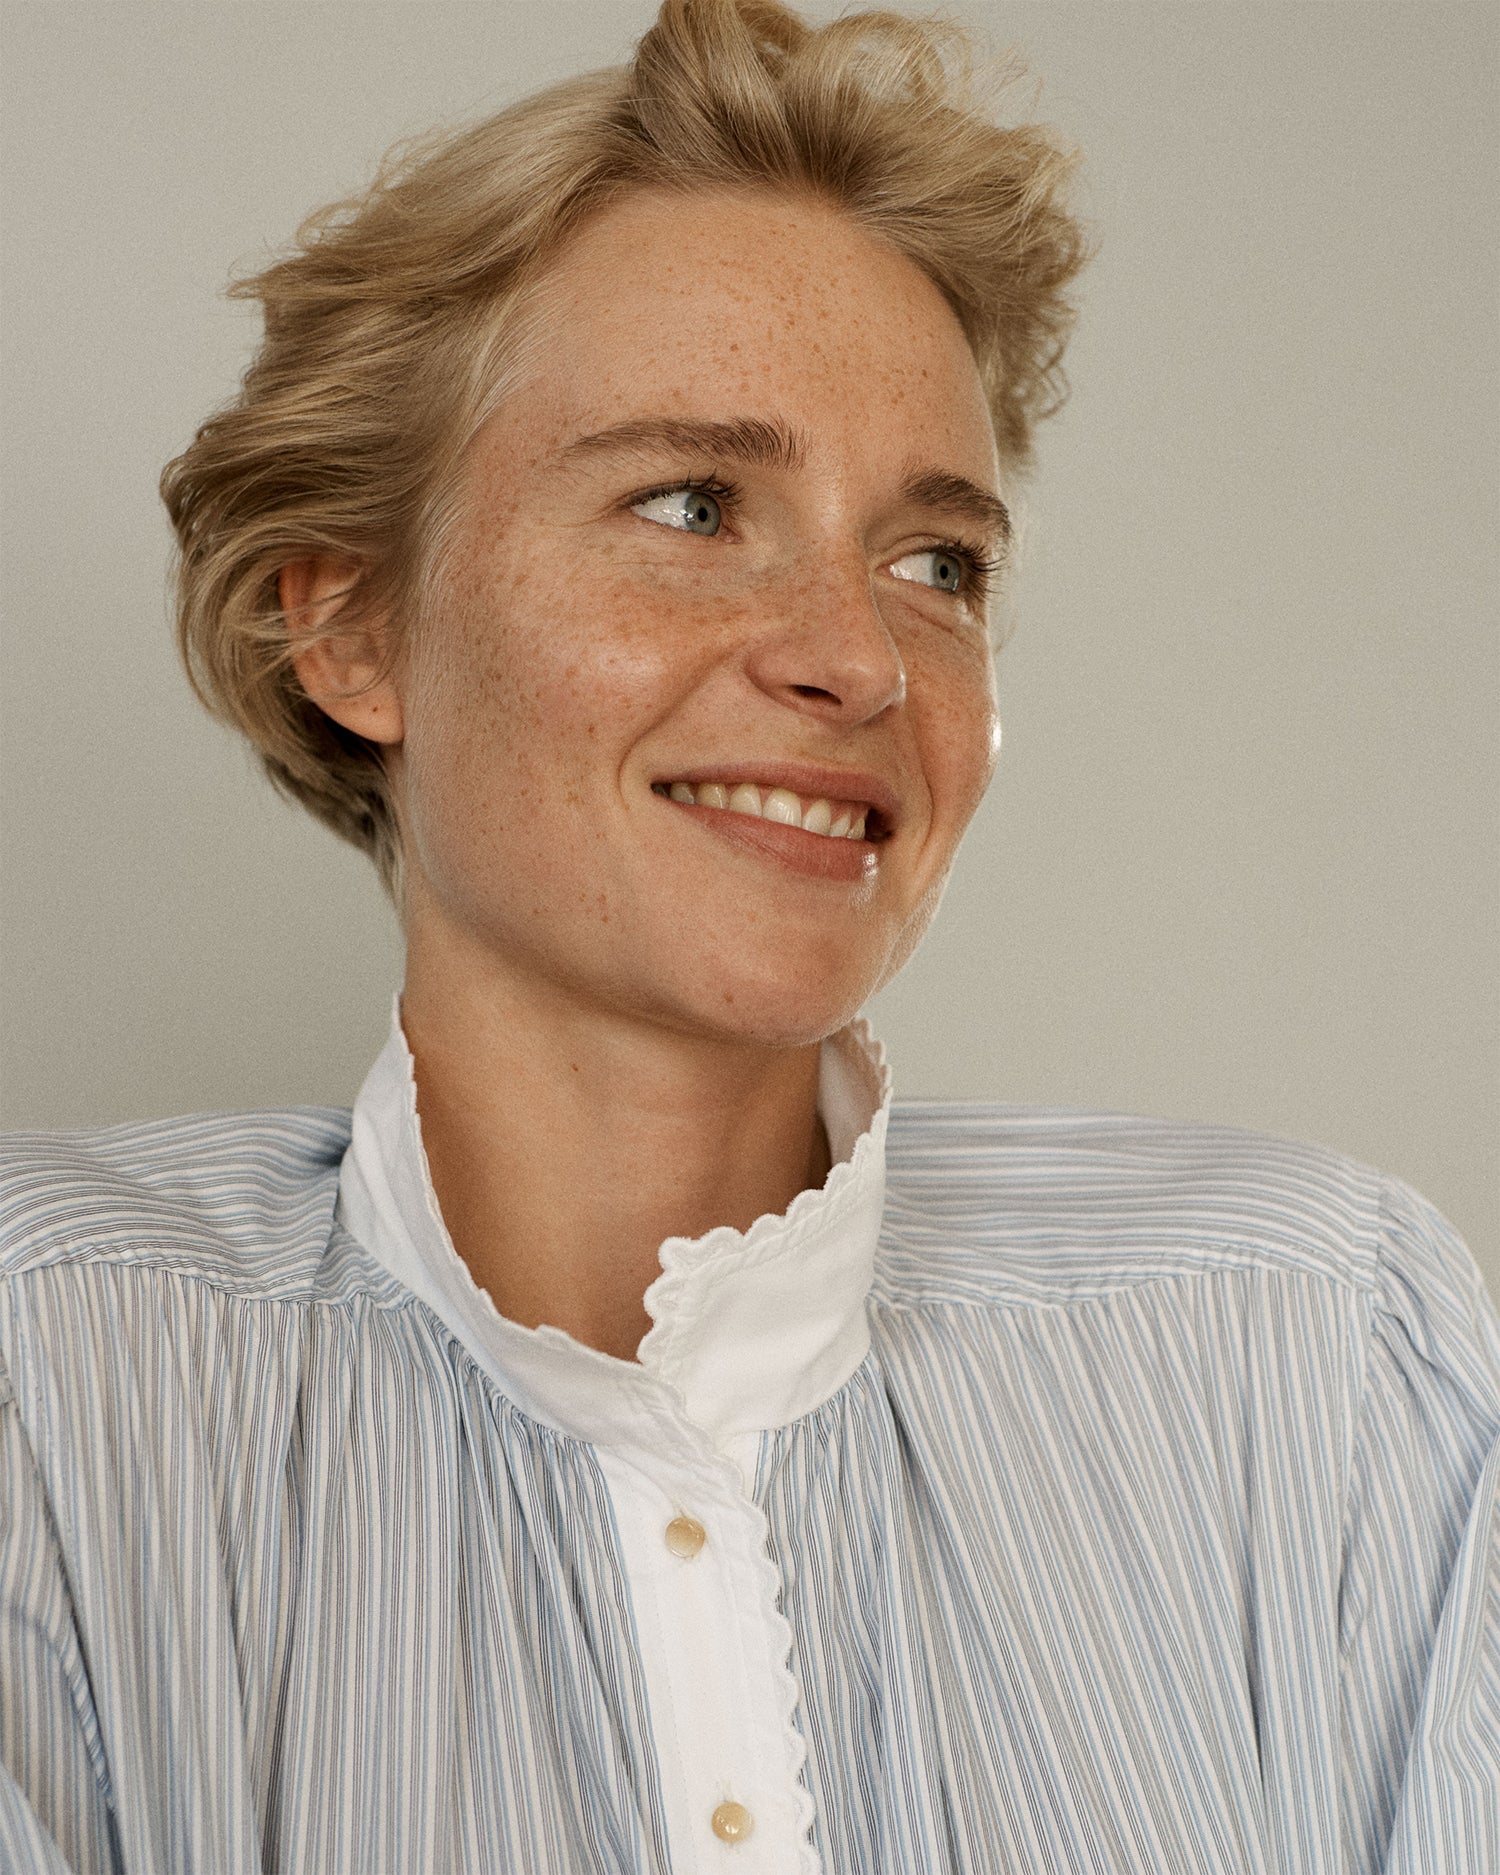 Portrait of a woman smiling and looking away from camera. She is wearing a striped cotton blouse with eyelet collar trim.